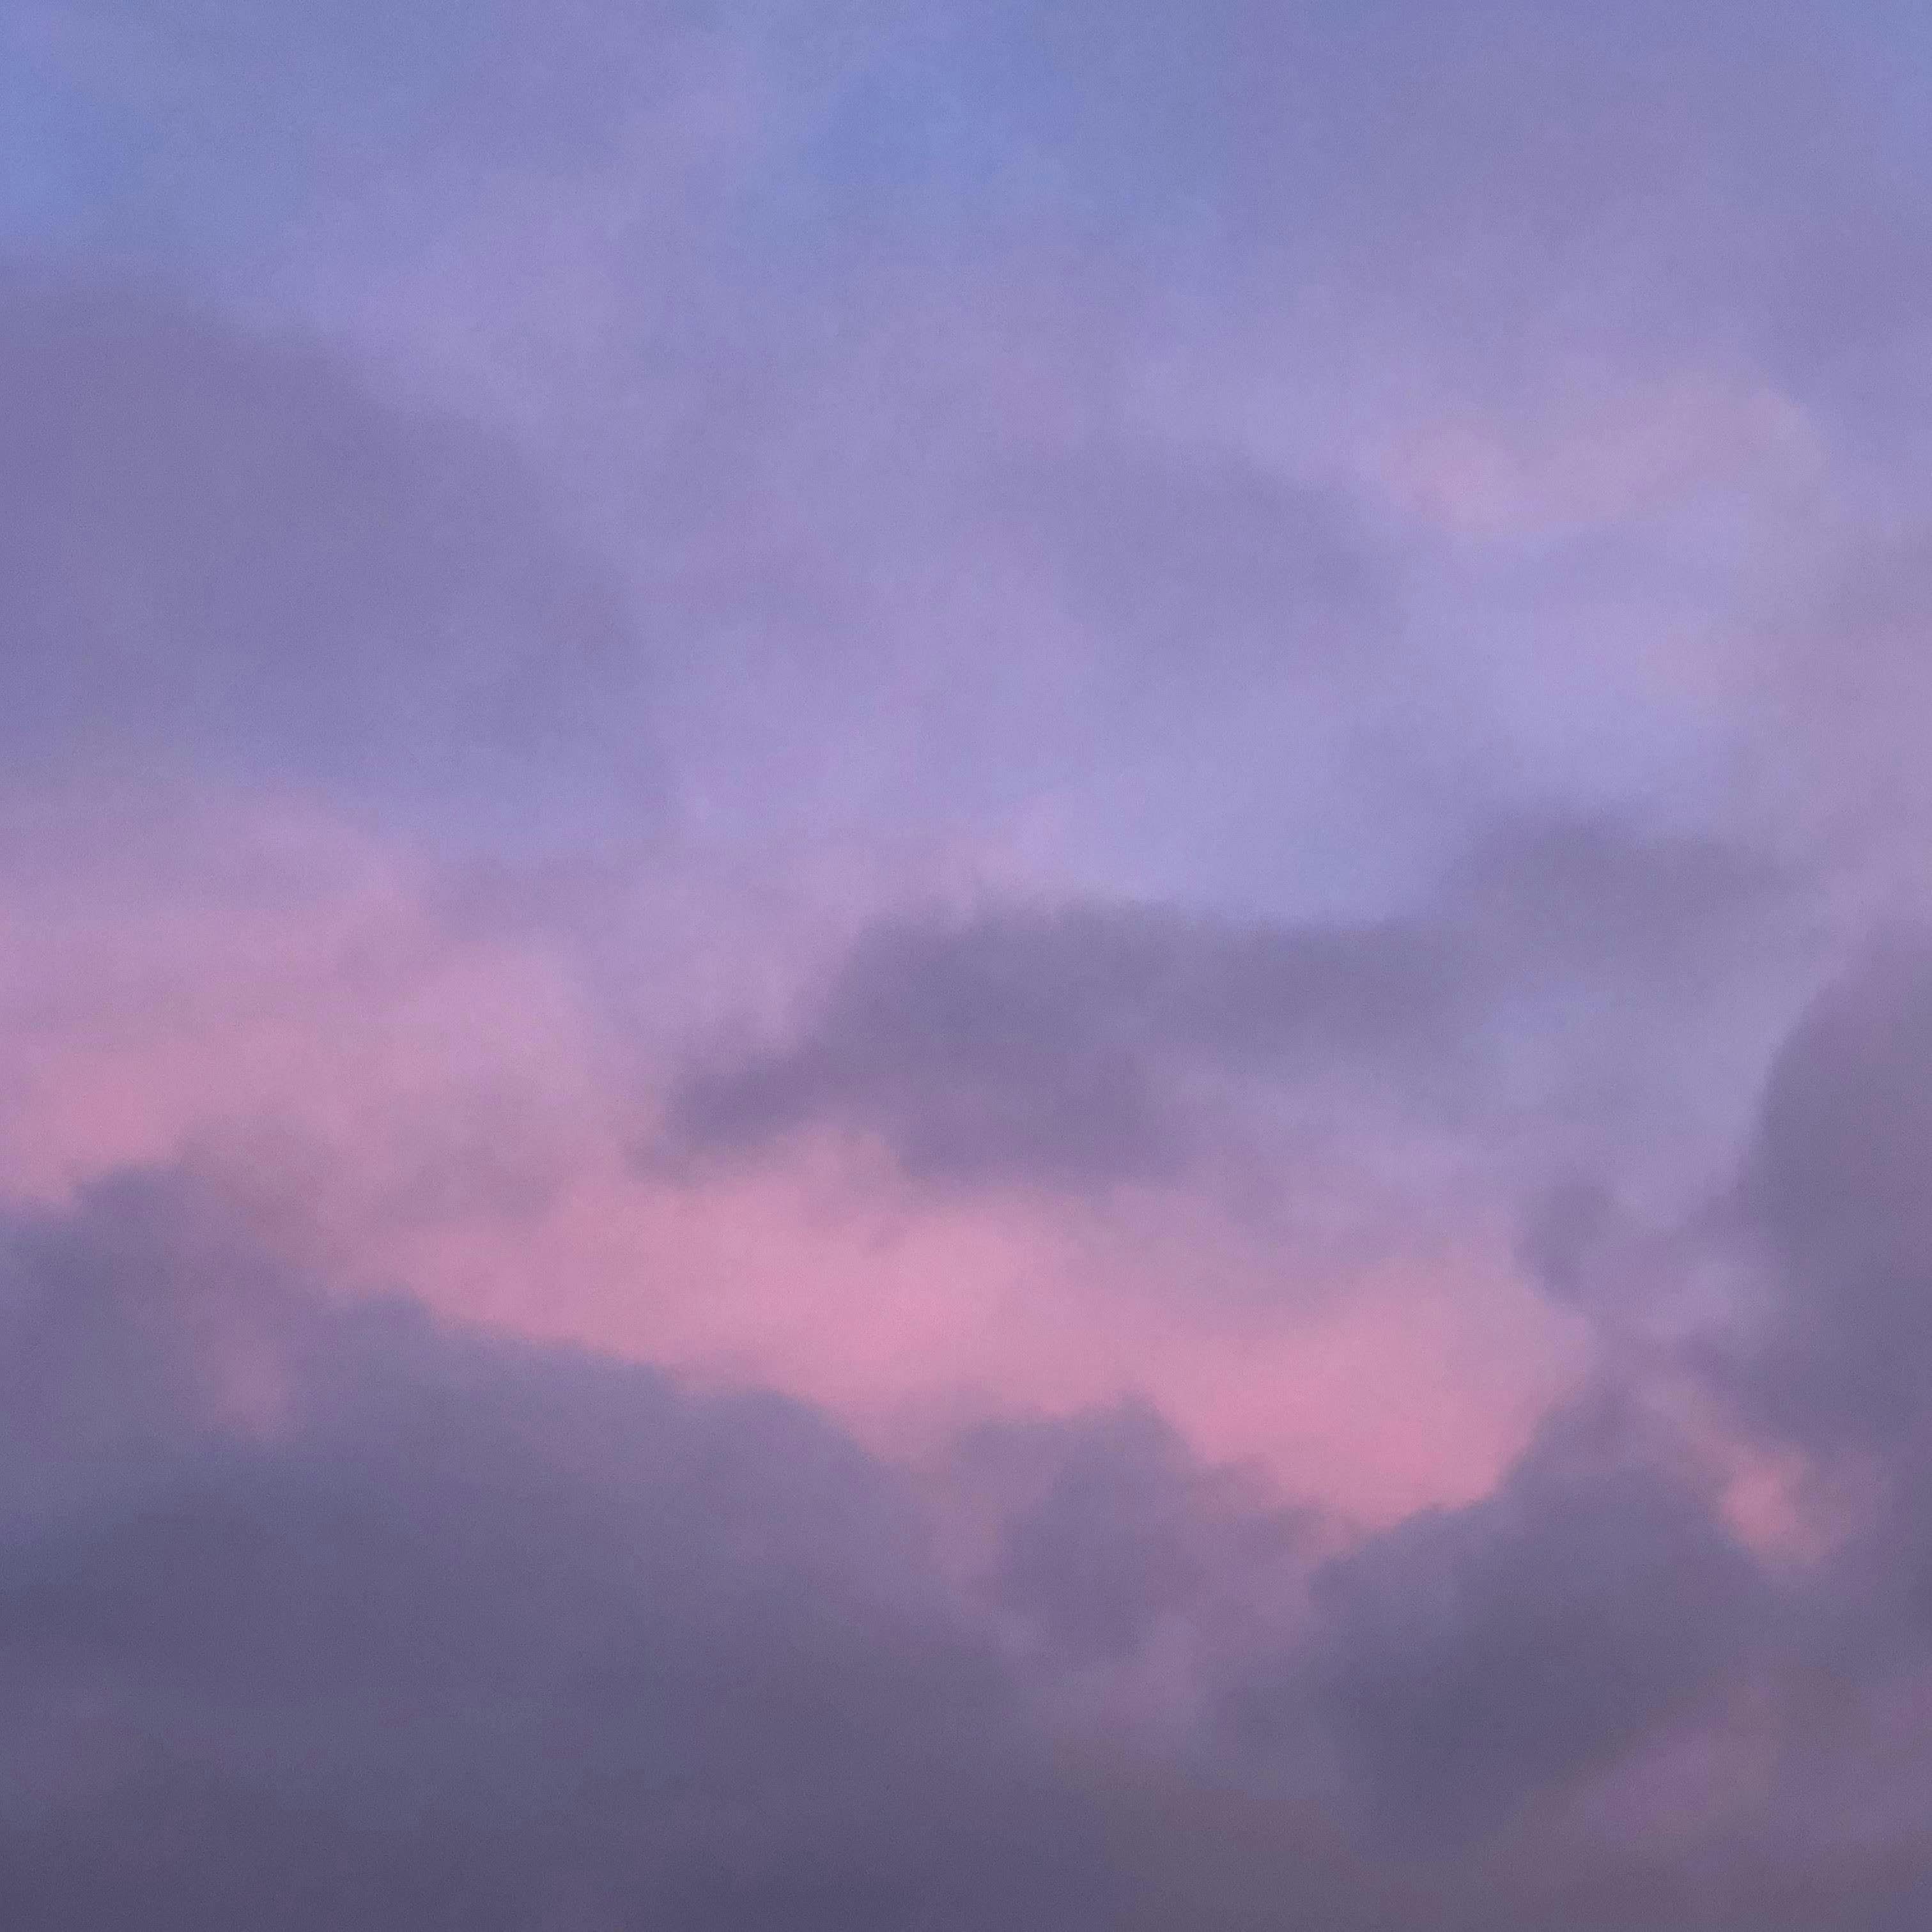 A pink and purple sky with puffy clouds at sunset